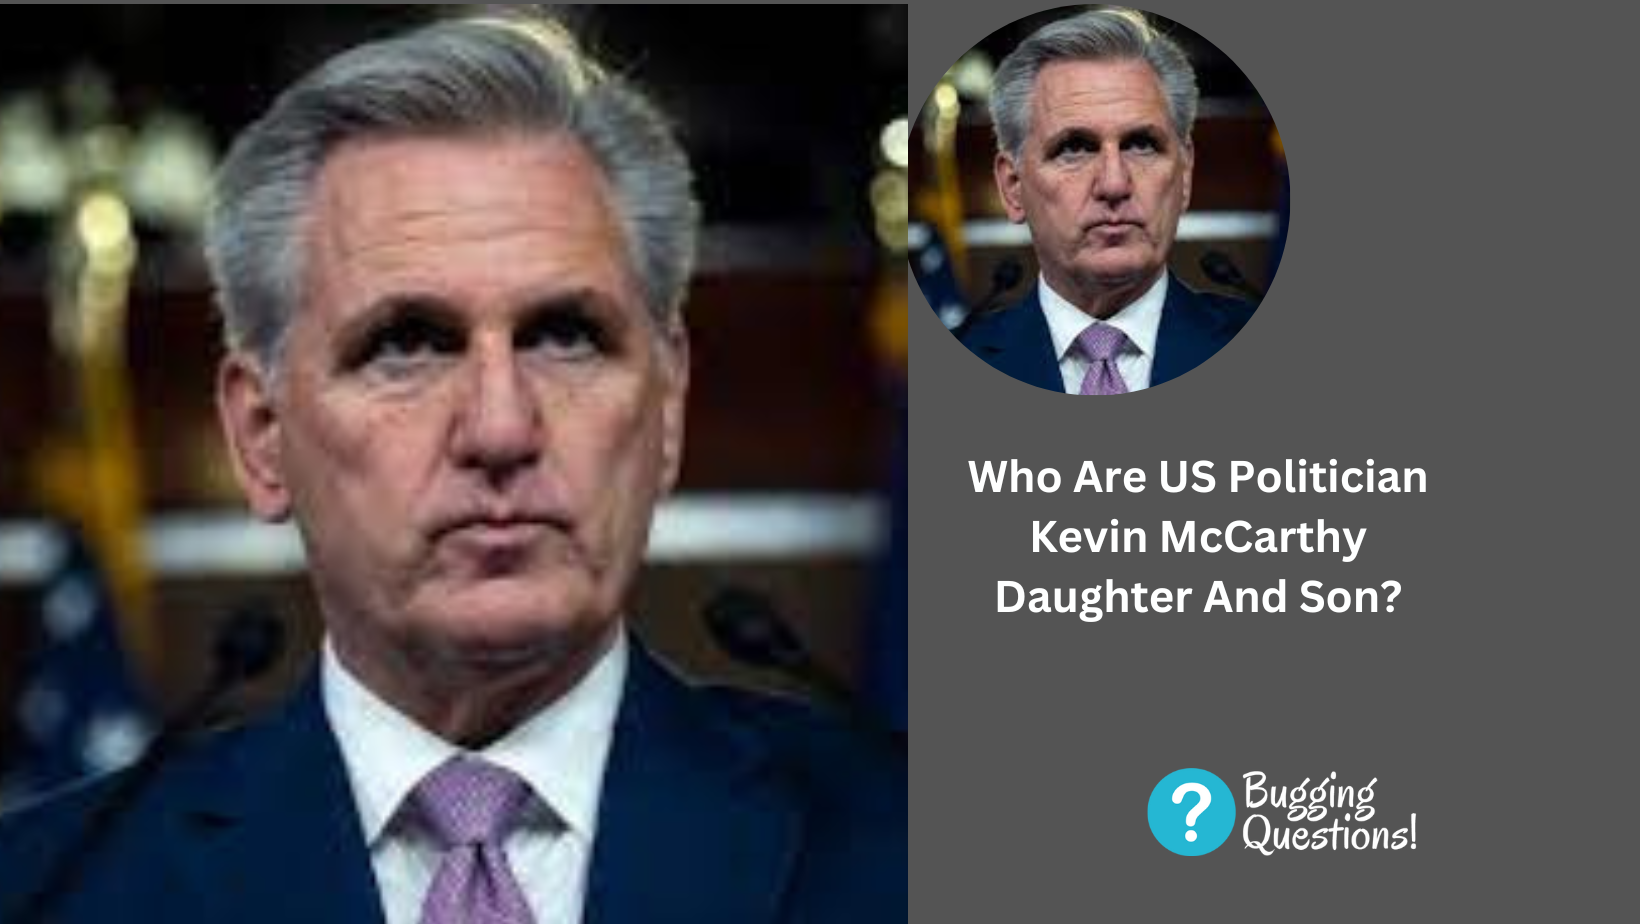 Who Are US Politician Kevin McCarthy Daughter And Son?